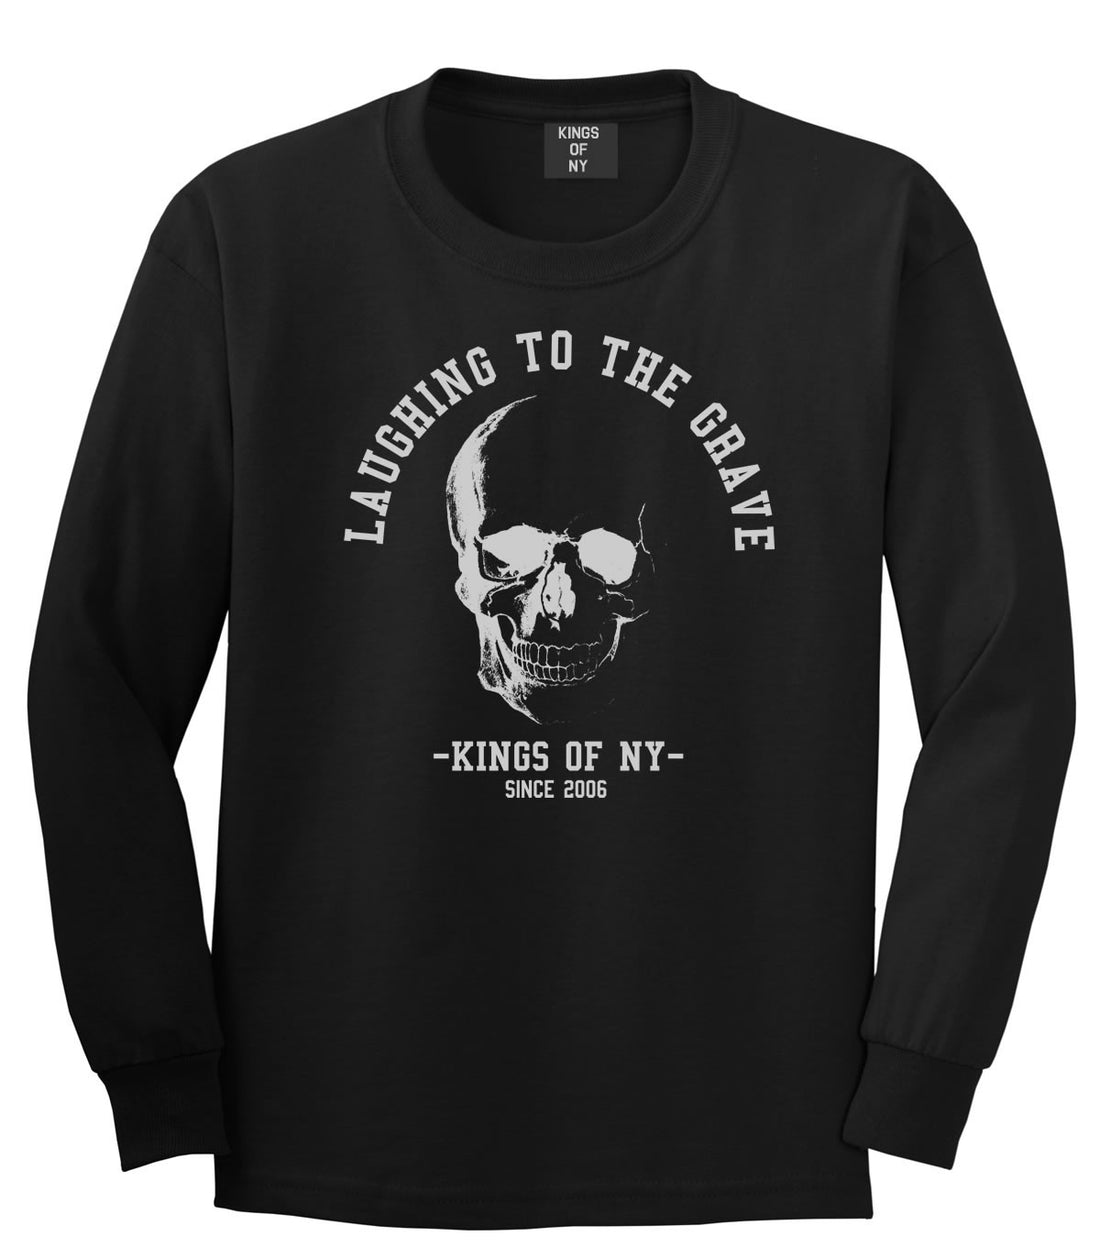 Laughing To The Grave Skull 2006 Long Sleeve T-Shirt in Black By Kings Of NY